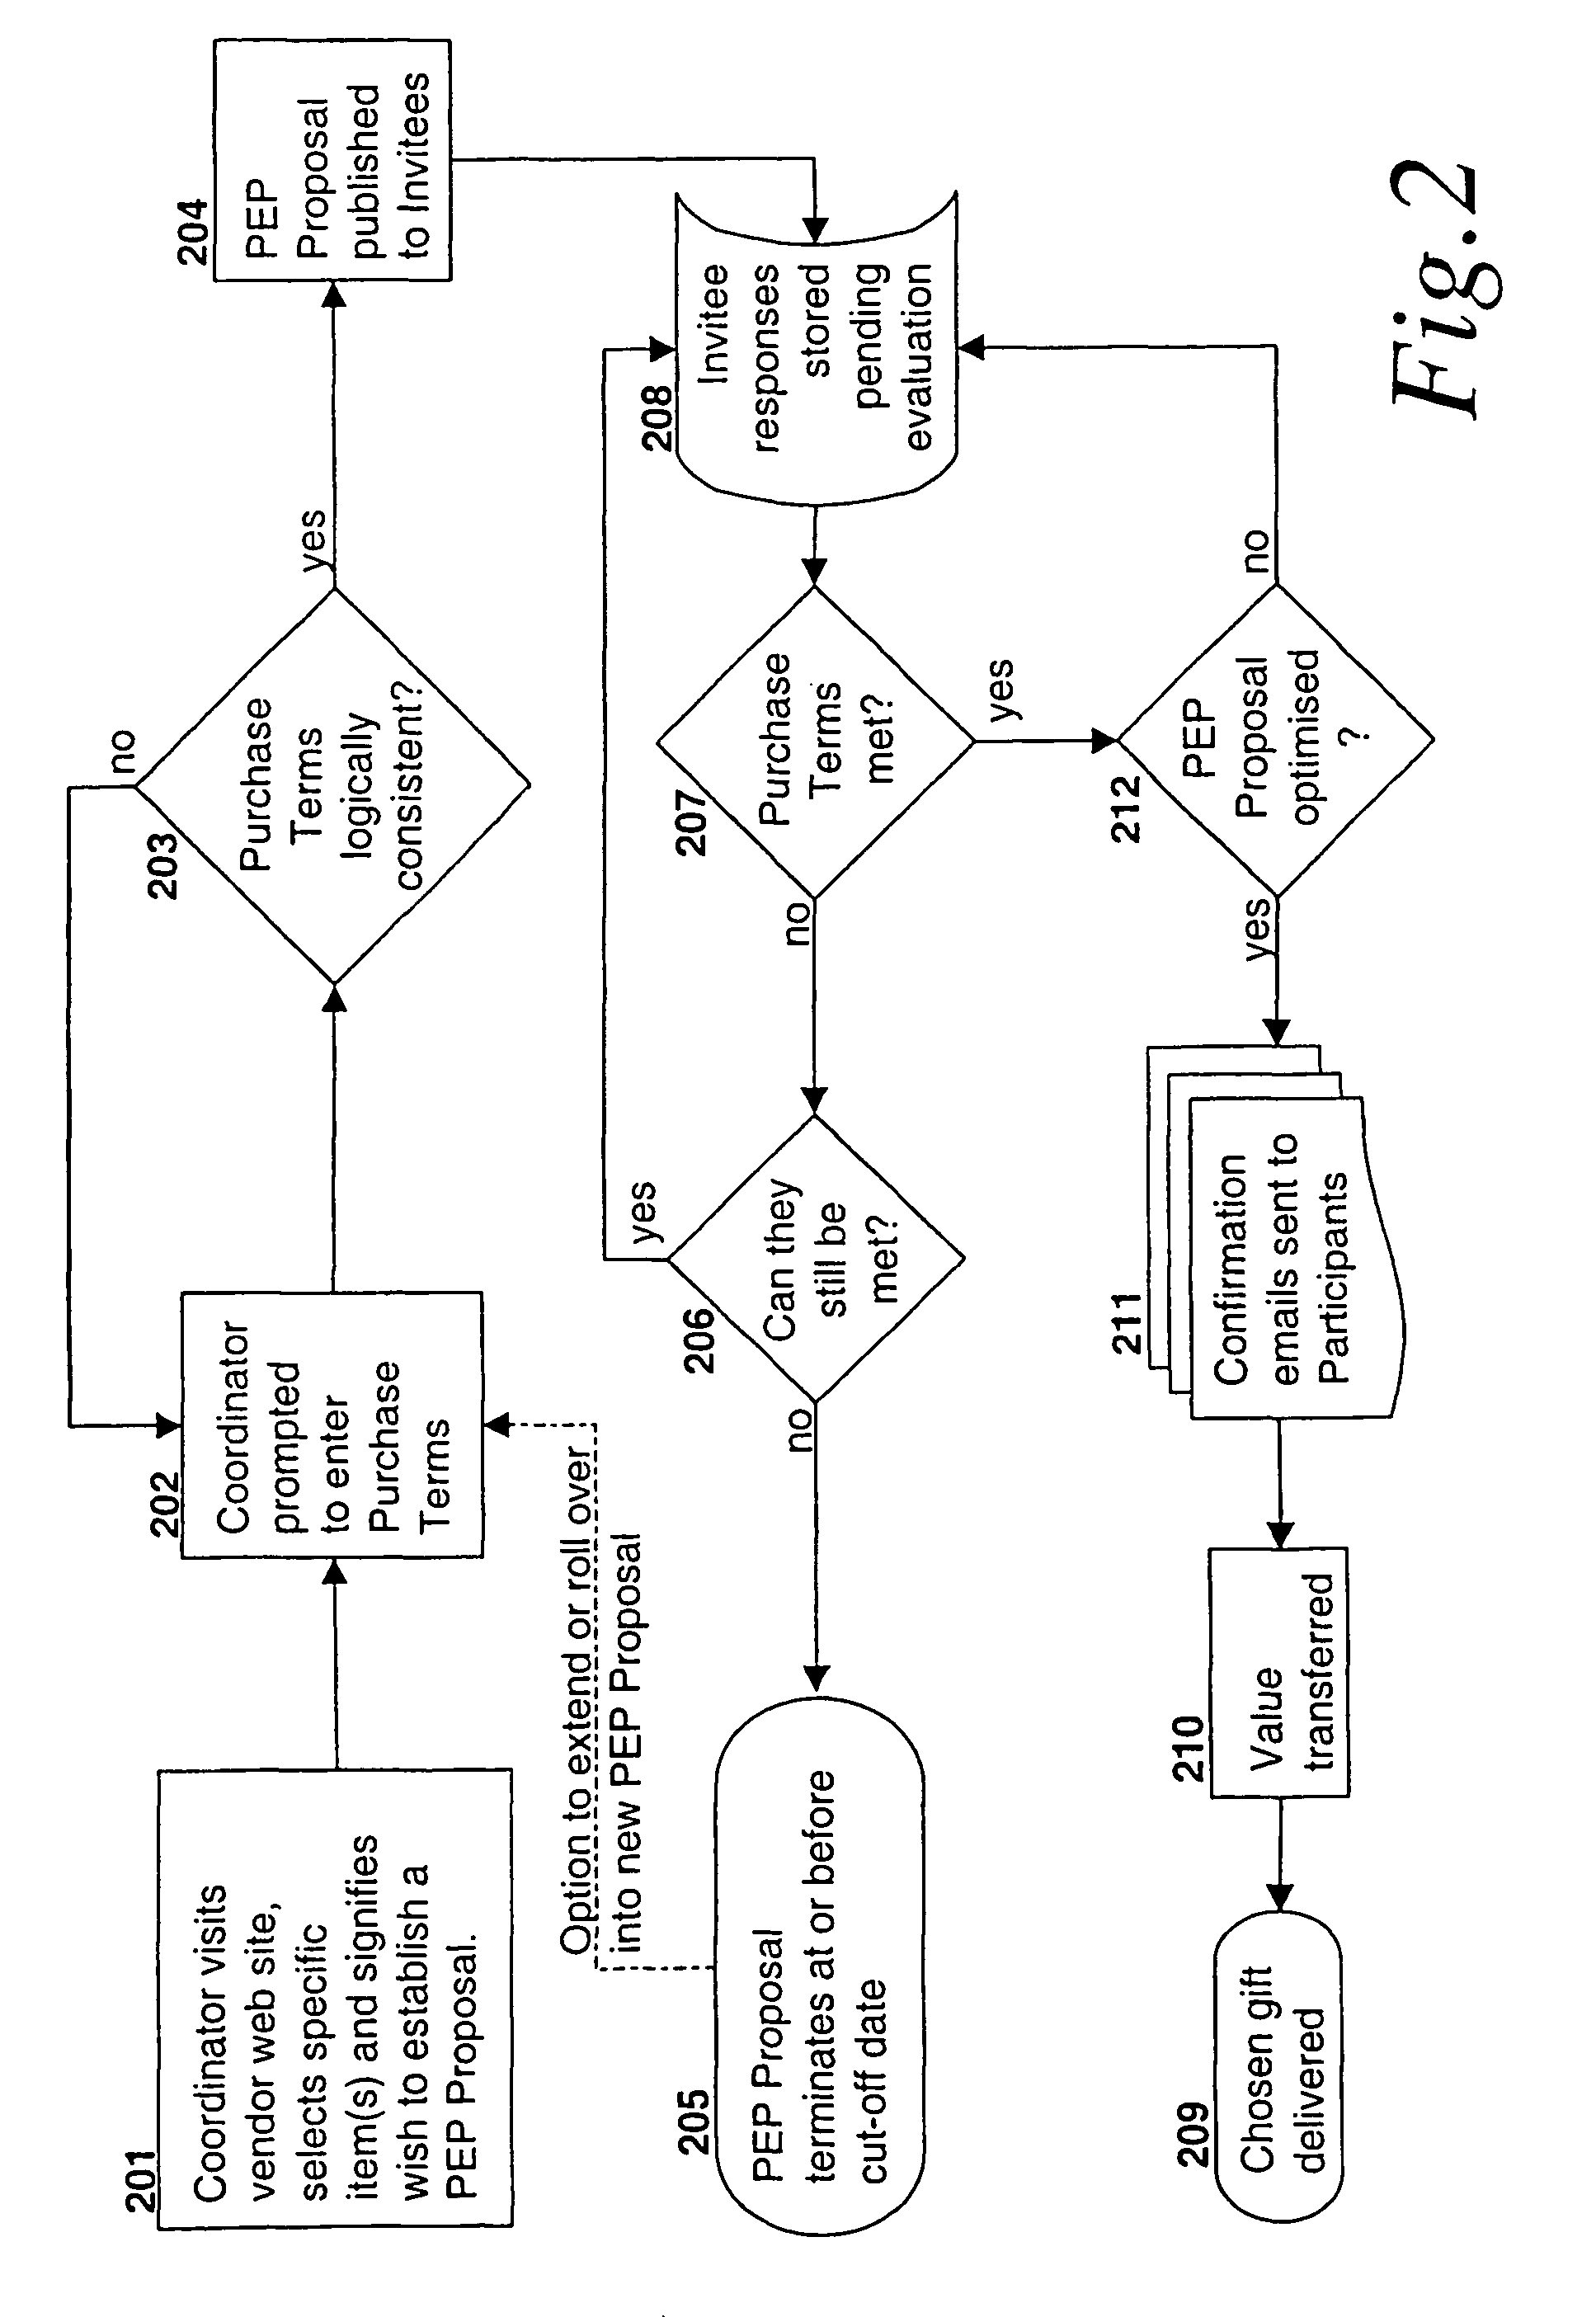 System and method for pooled electronic purchasing